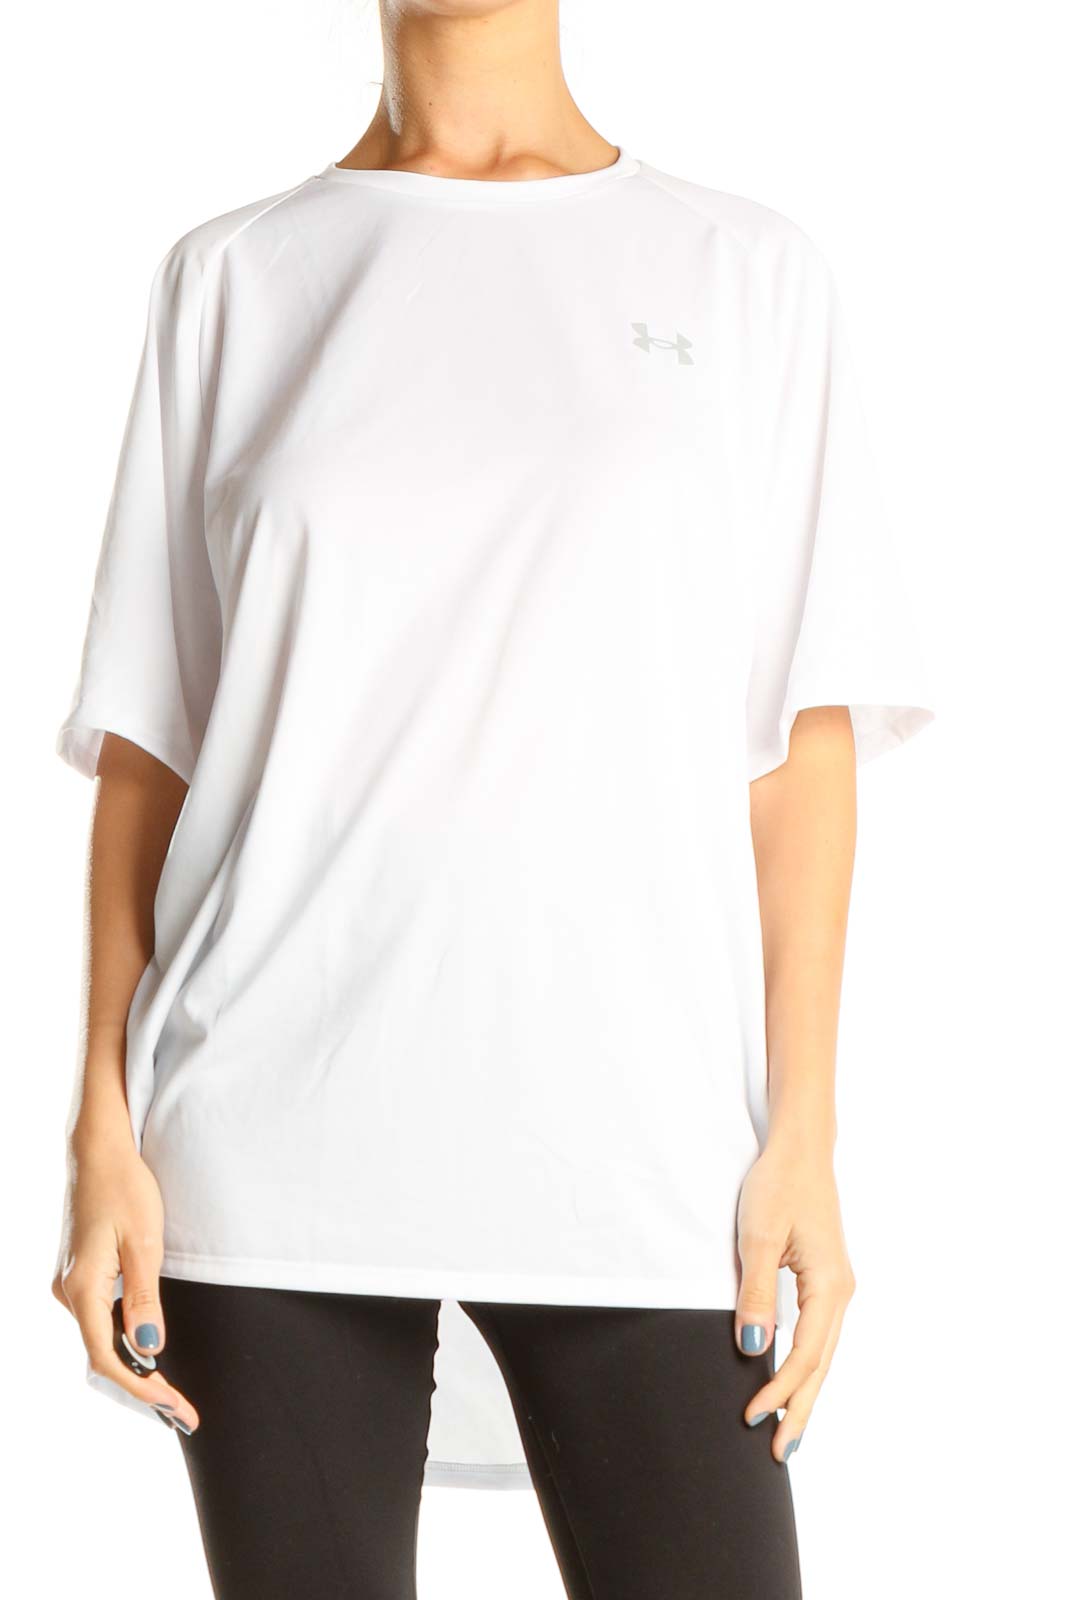 White Activewear Top Front